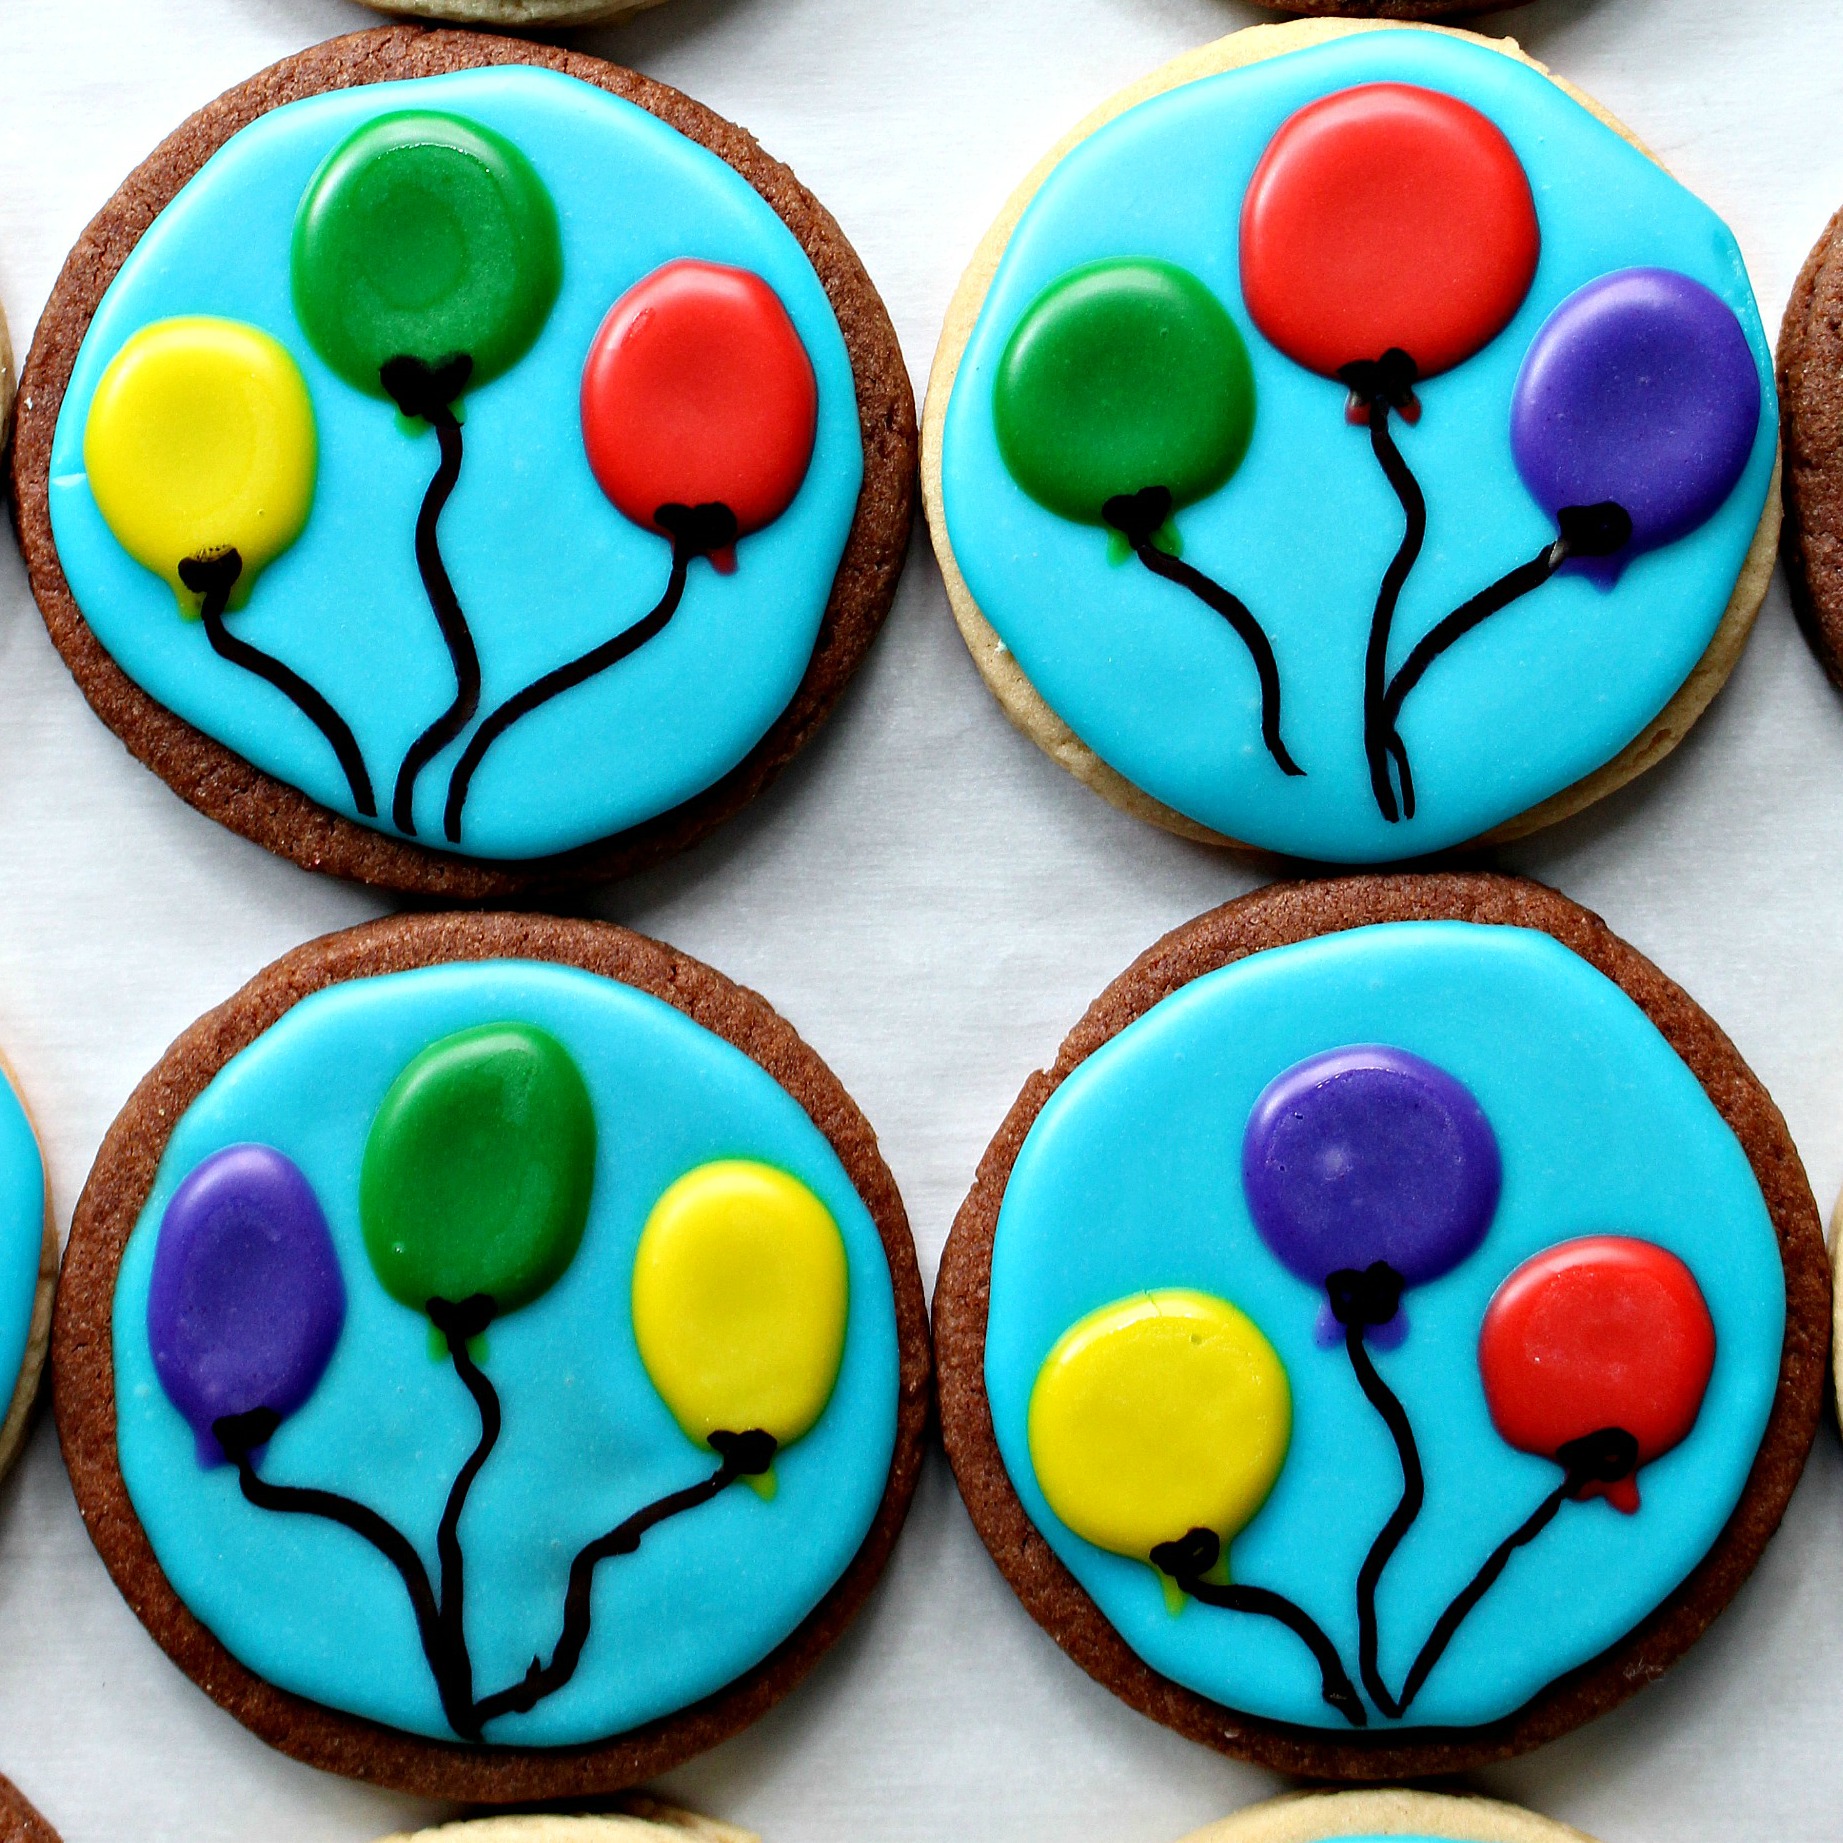 Chocolate and vanilla sugar cookies decorated with blue background and three balloons.